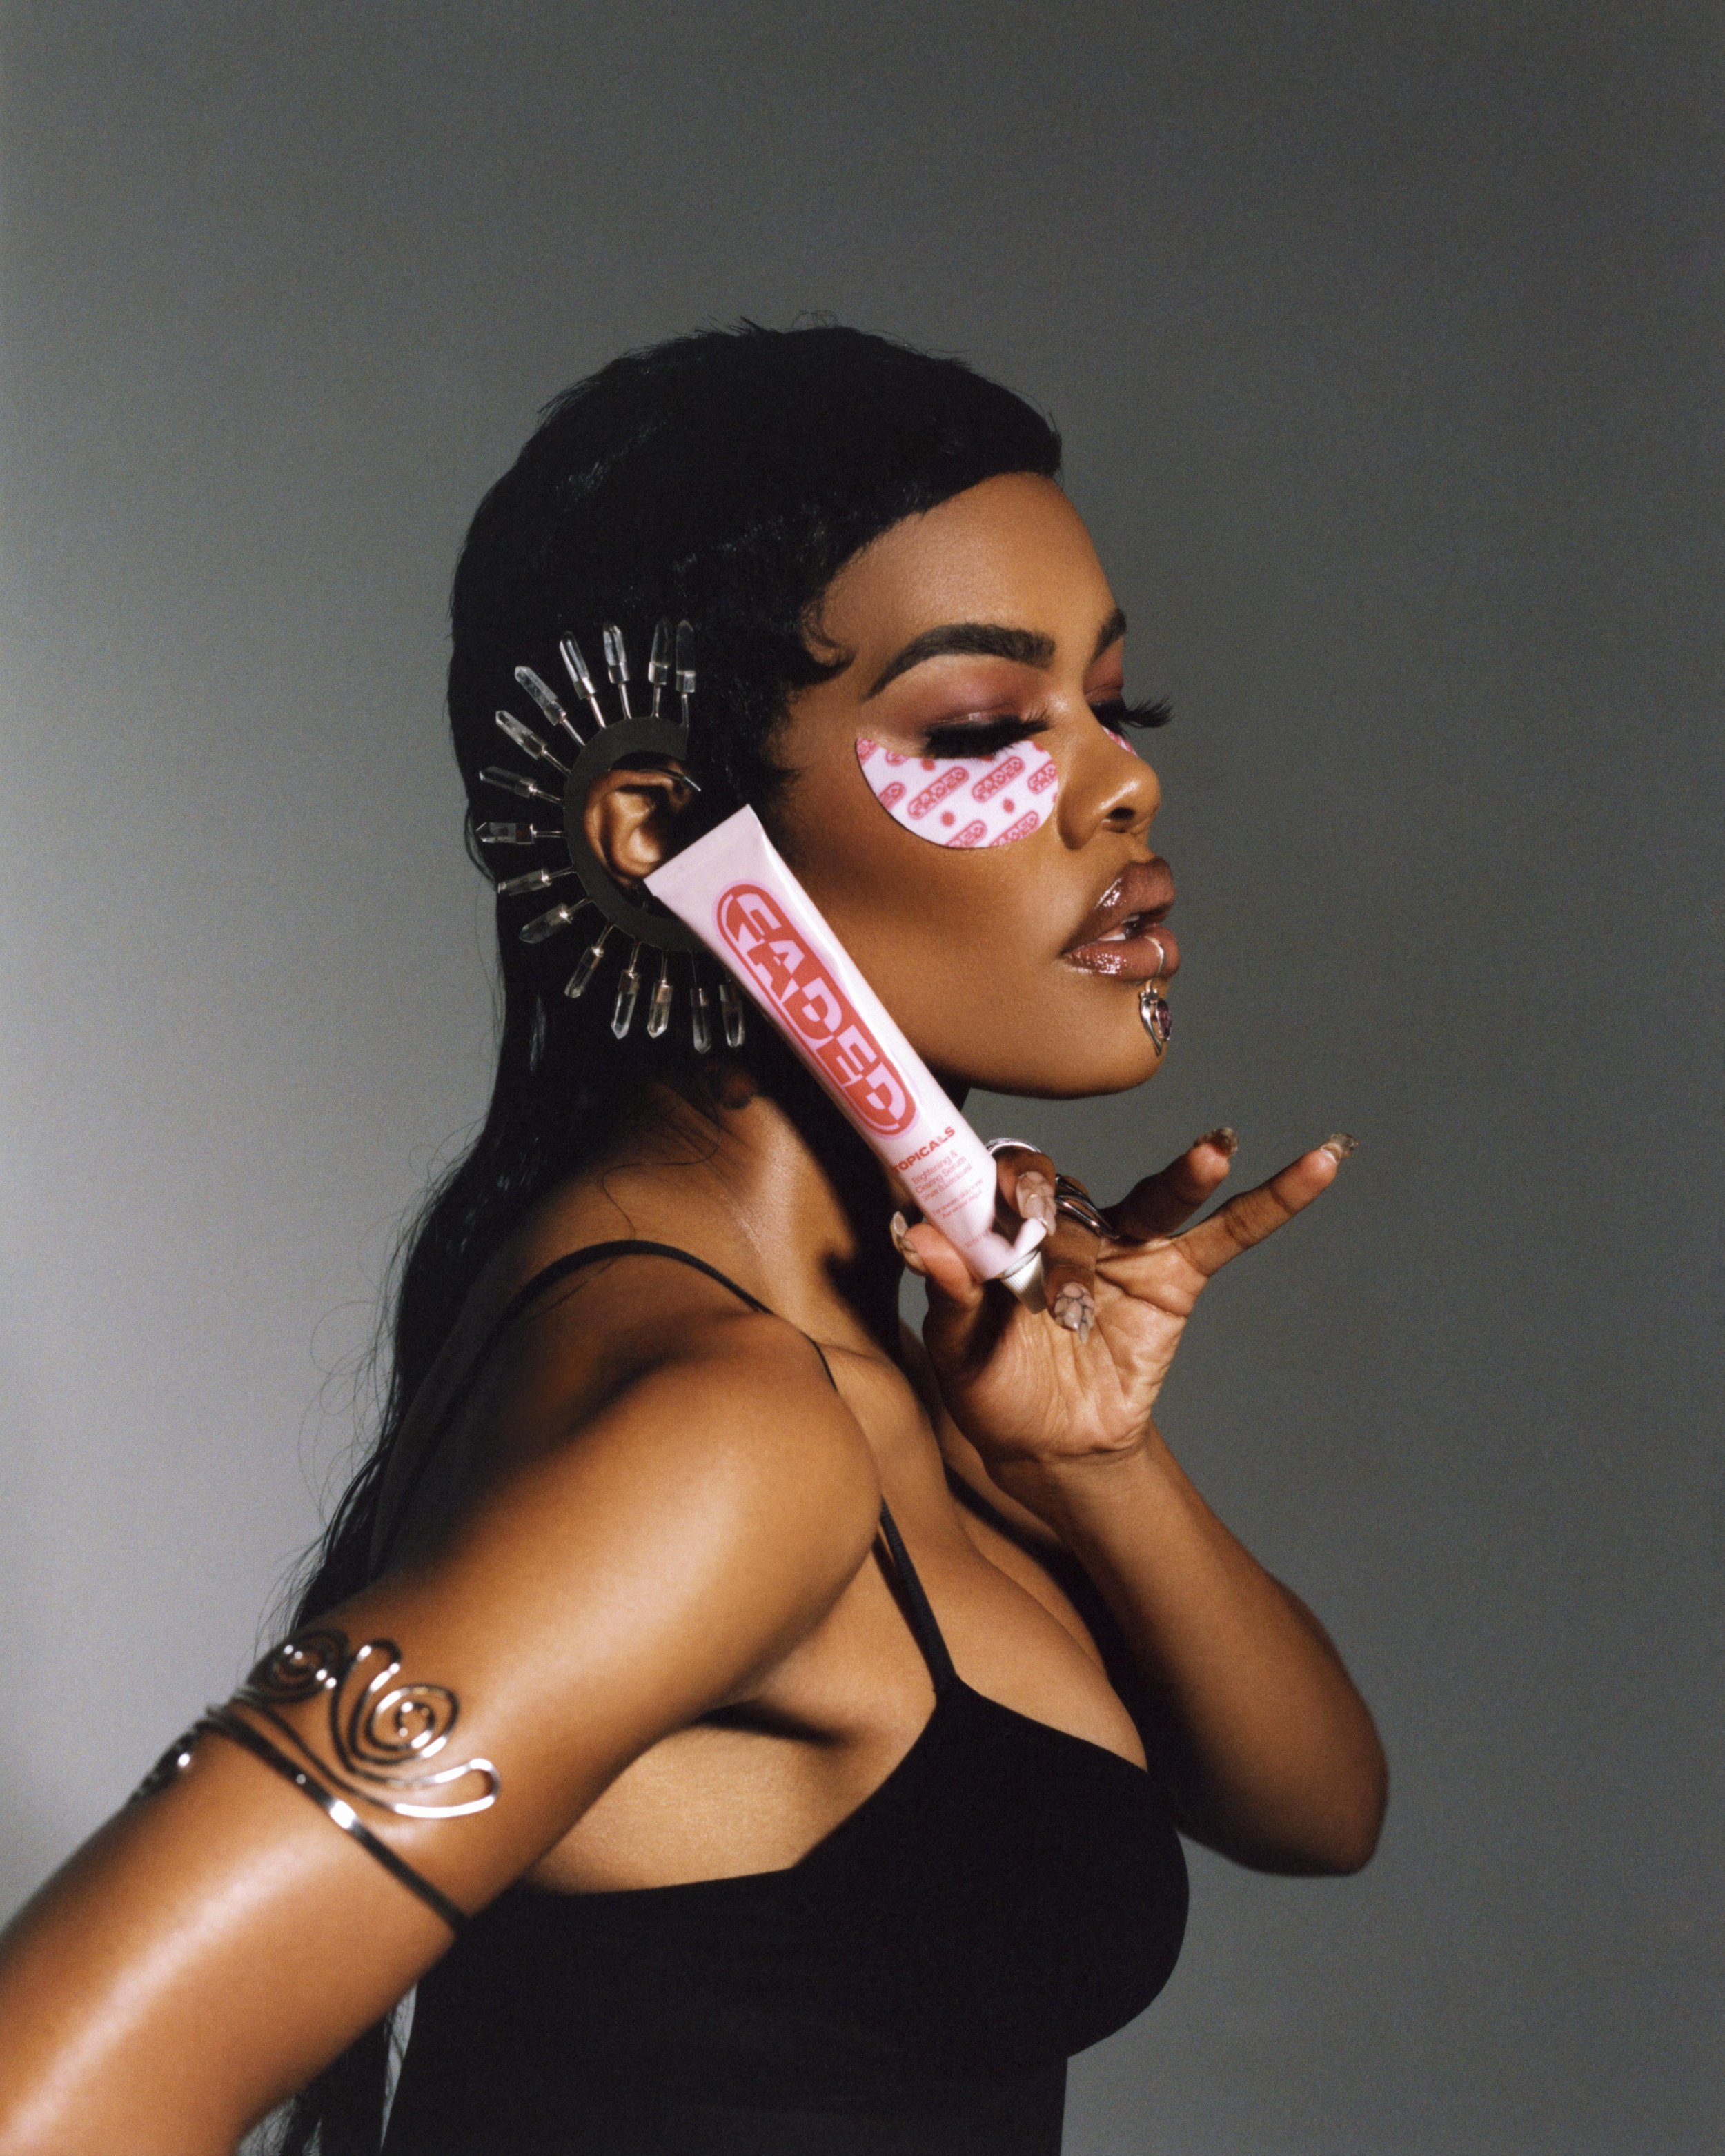   Teyana Taylor Billboard Campaign for Topicals  